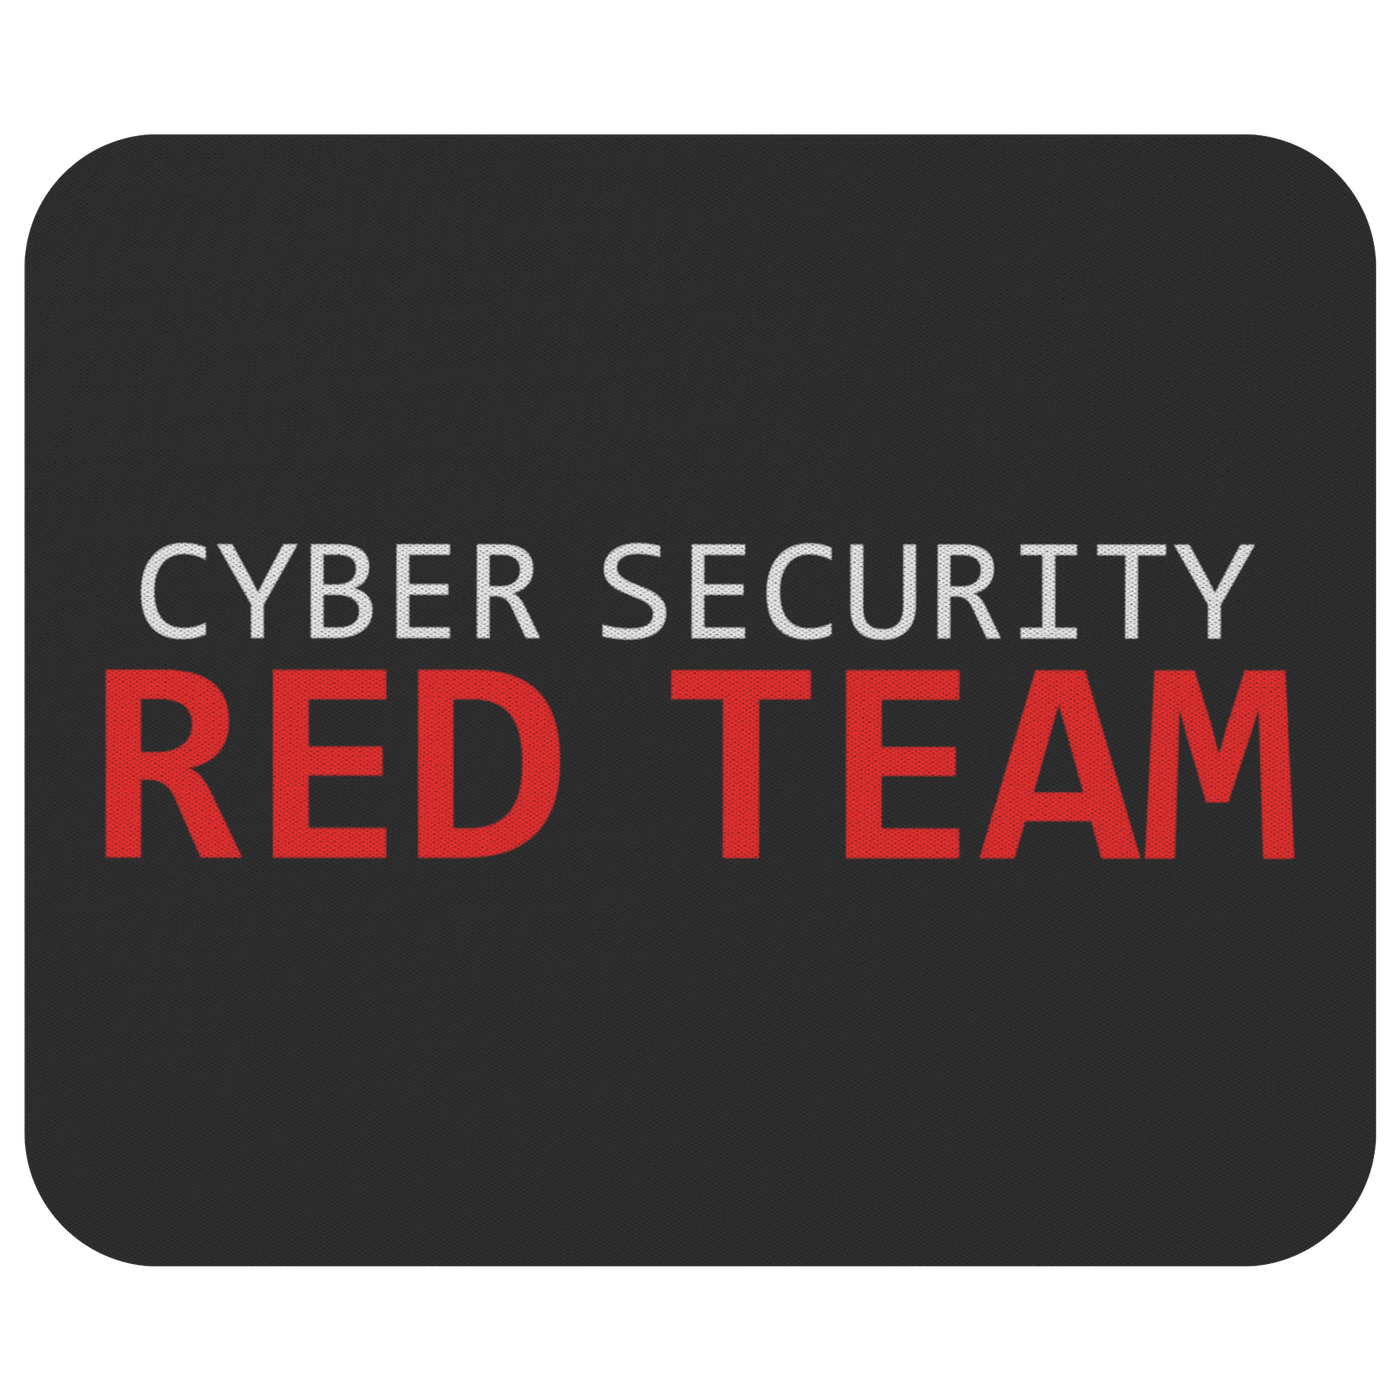 Cyber security red team - Mousepad